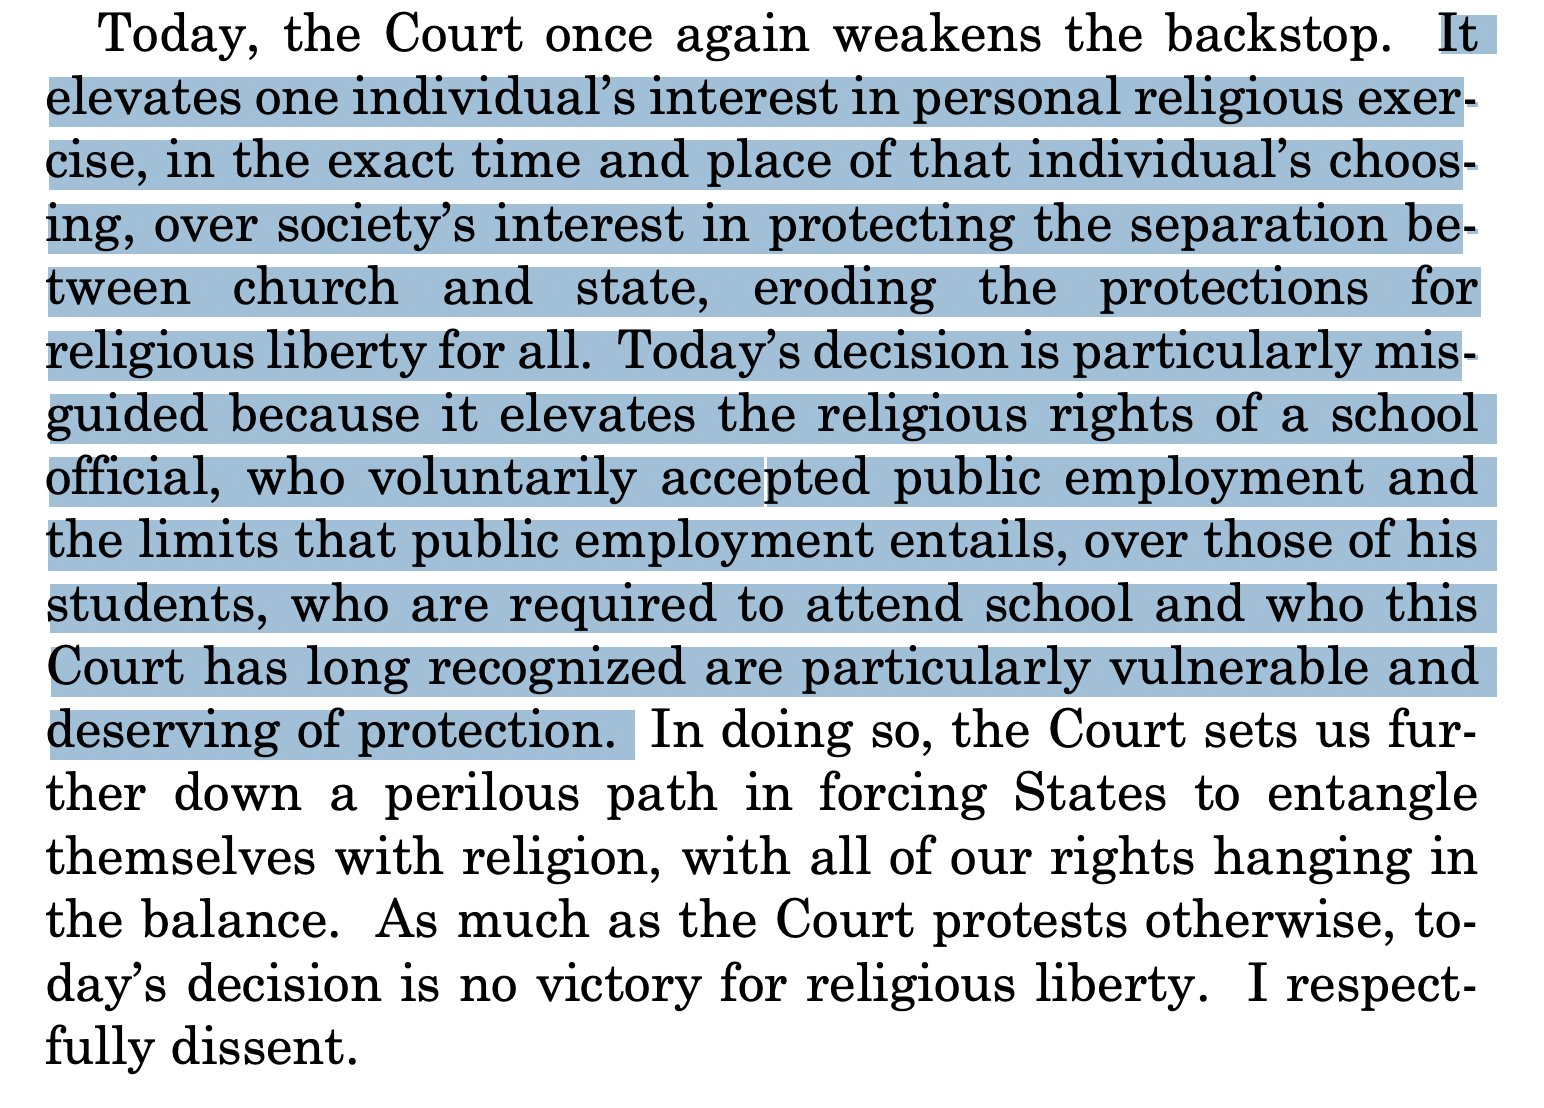 Today, the Court once again weakens the backstop. Itelevates one individual’s interest in personal religious exercise, in the exact time and place of that individual’s choosing, over society’s interest in protecting the separation between church and state, eroding the protections forreligious liberty for all. Today’s decision is particularly misguided because it elevates the religious rights of a schoolofficial, who voluntarily accepted public employment andthe limits that public employment entails, over those of hisstudents, who are required to attend school and who thisCourt has long recognized are particularly vulnerable anddeserving of protection. In doing so, the Court sets us further down a perilous path in forcing States to entanglethemselves with religion, with all of our rights hanging inthe balance. As much as the Court protests otherwise, today’s decision is no victory for religious liberty. I respectfully dissent. 